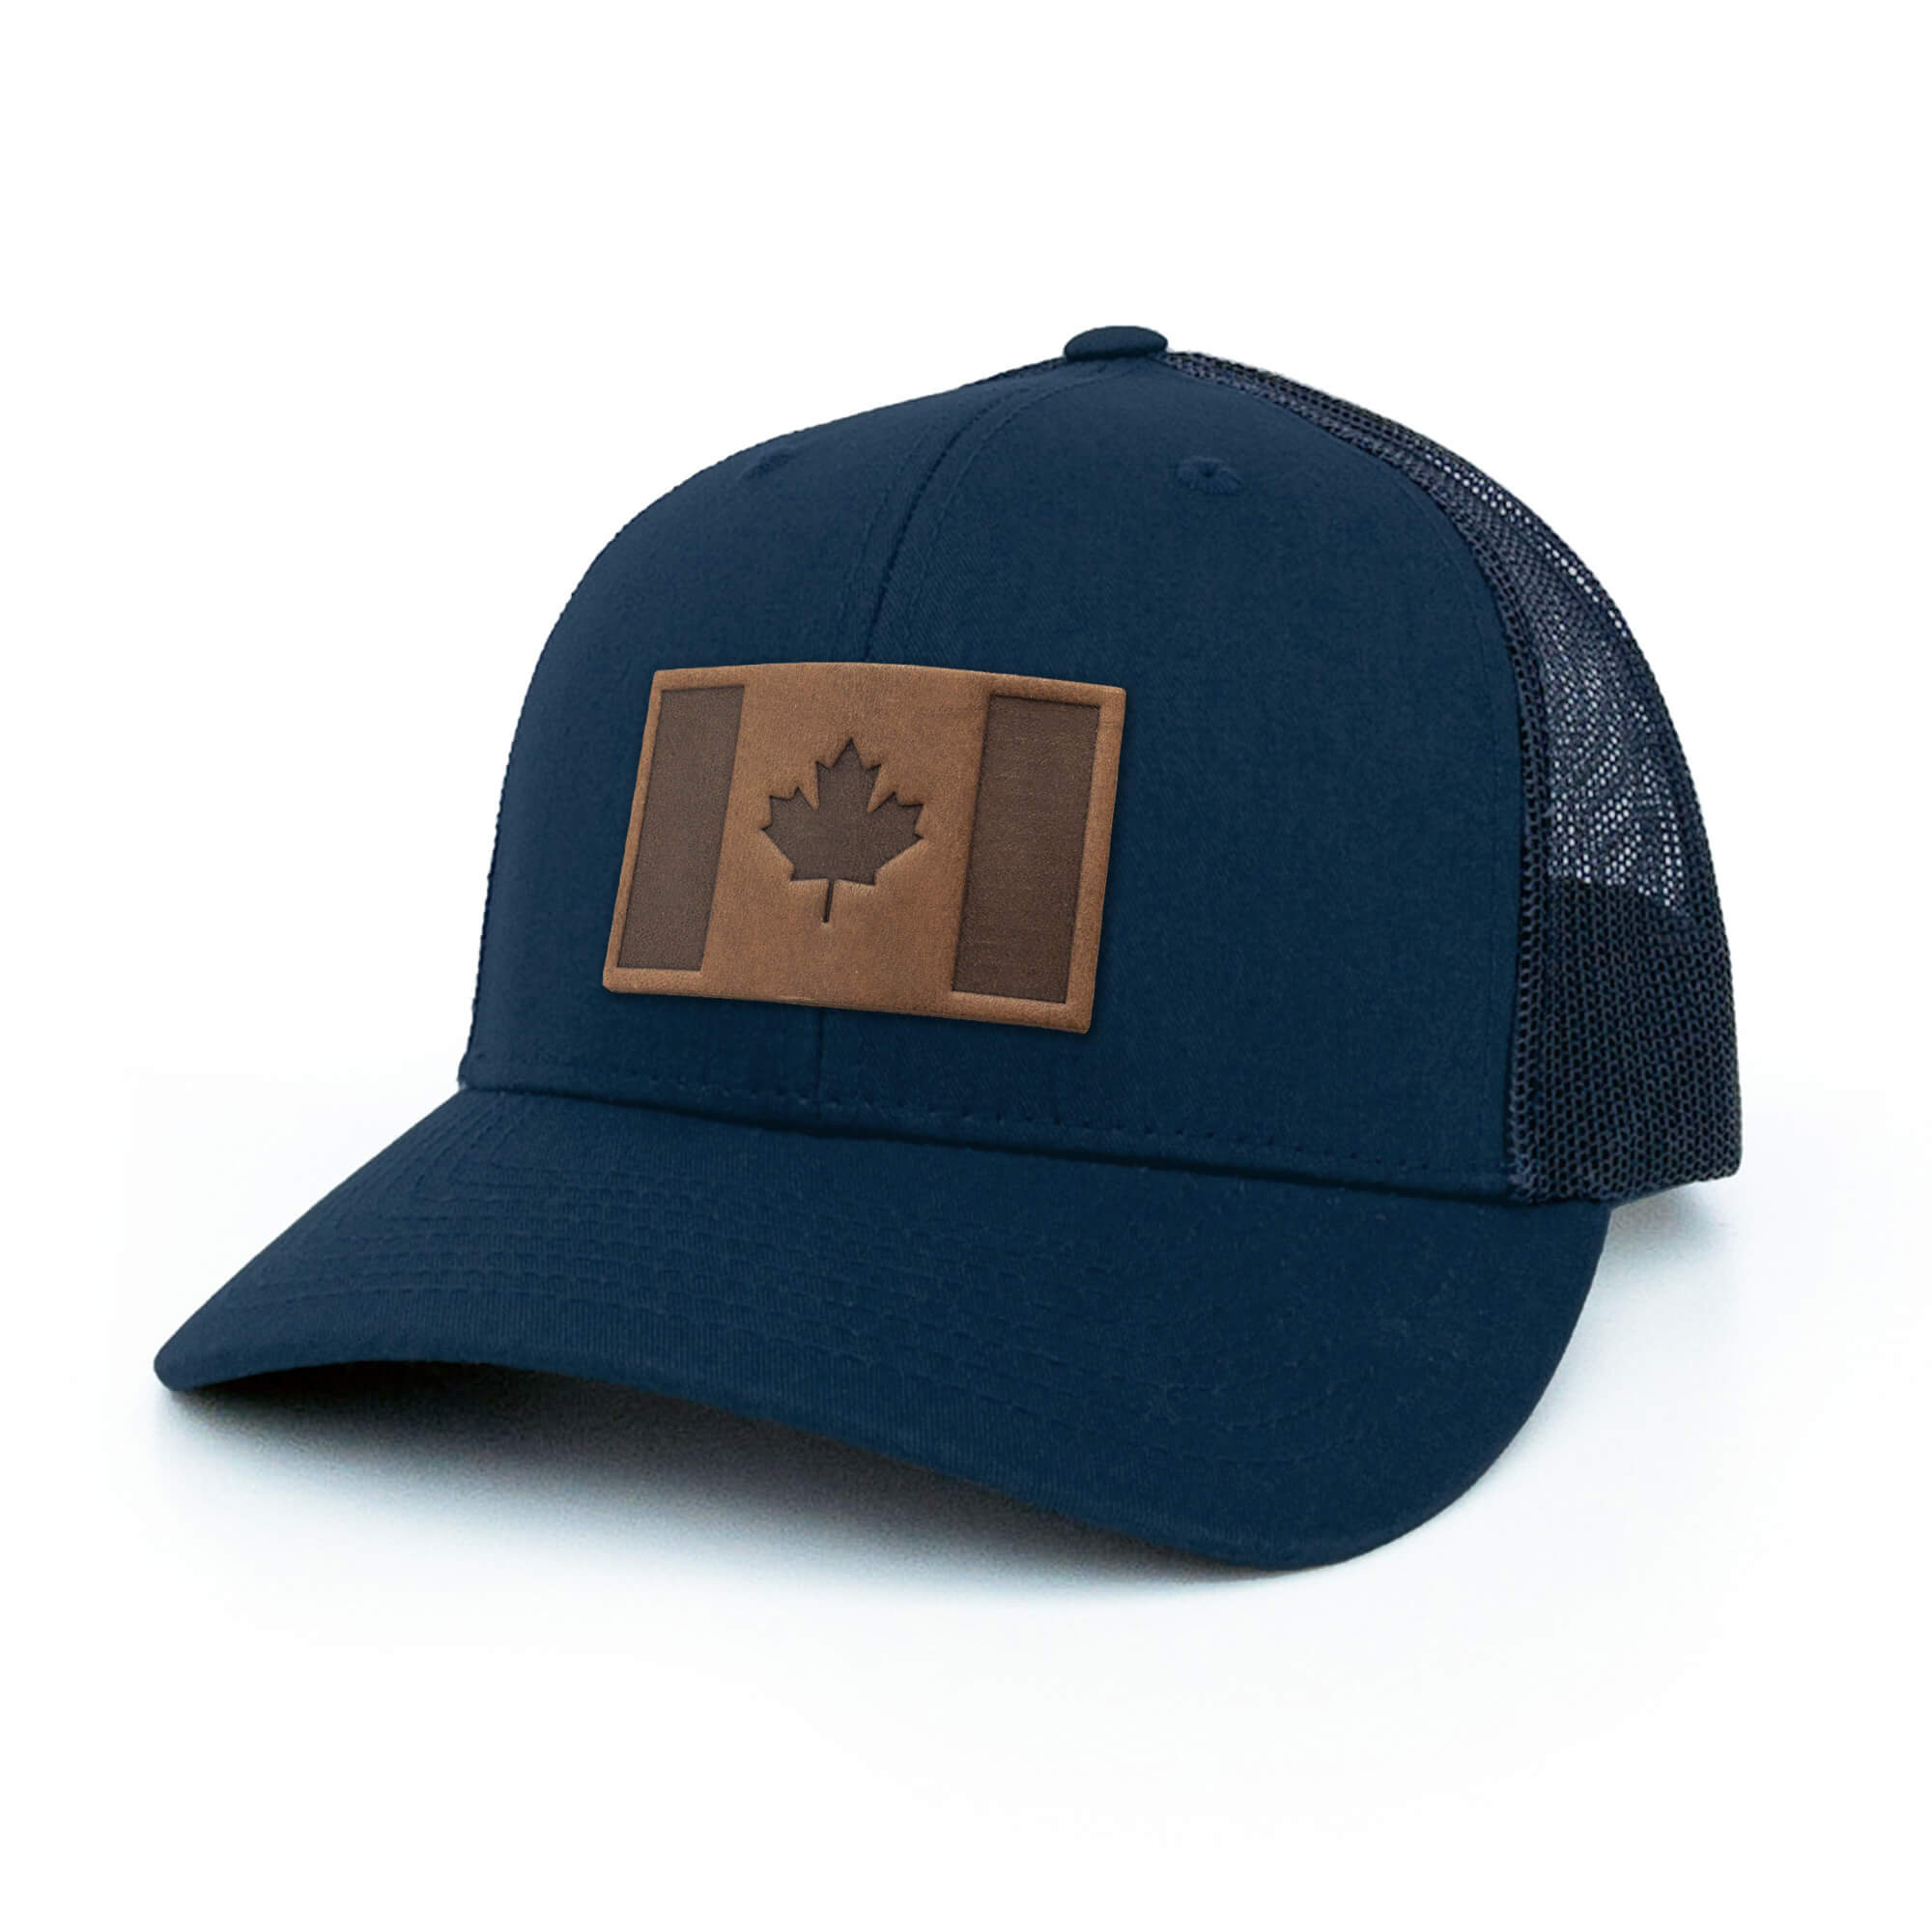 Navy trucker hat with full-grain leather patch of Canada Flag | BLACK-002-009, CHARC-002-009, NAVY-002-009, HGREY-002-009, MOSS-002-009, BROWN-002-009, RED-002-009